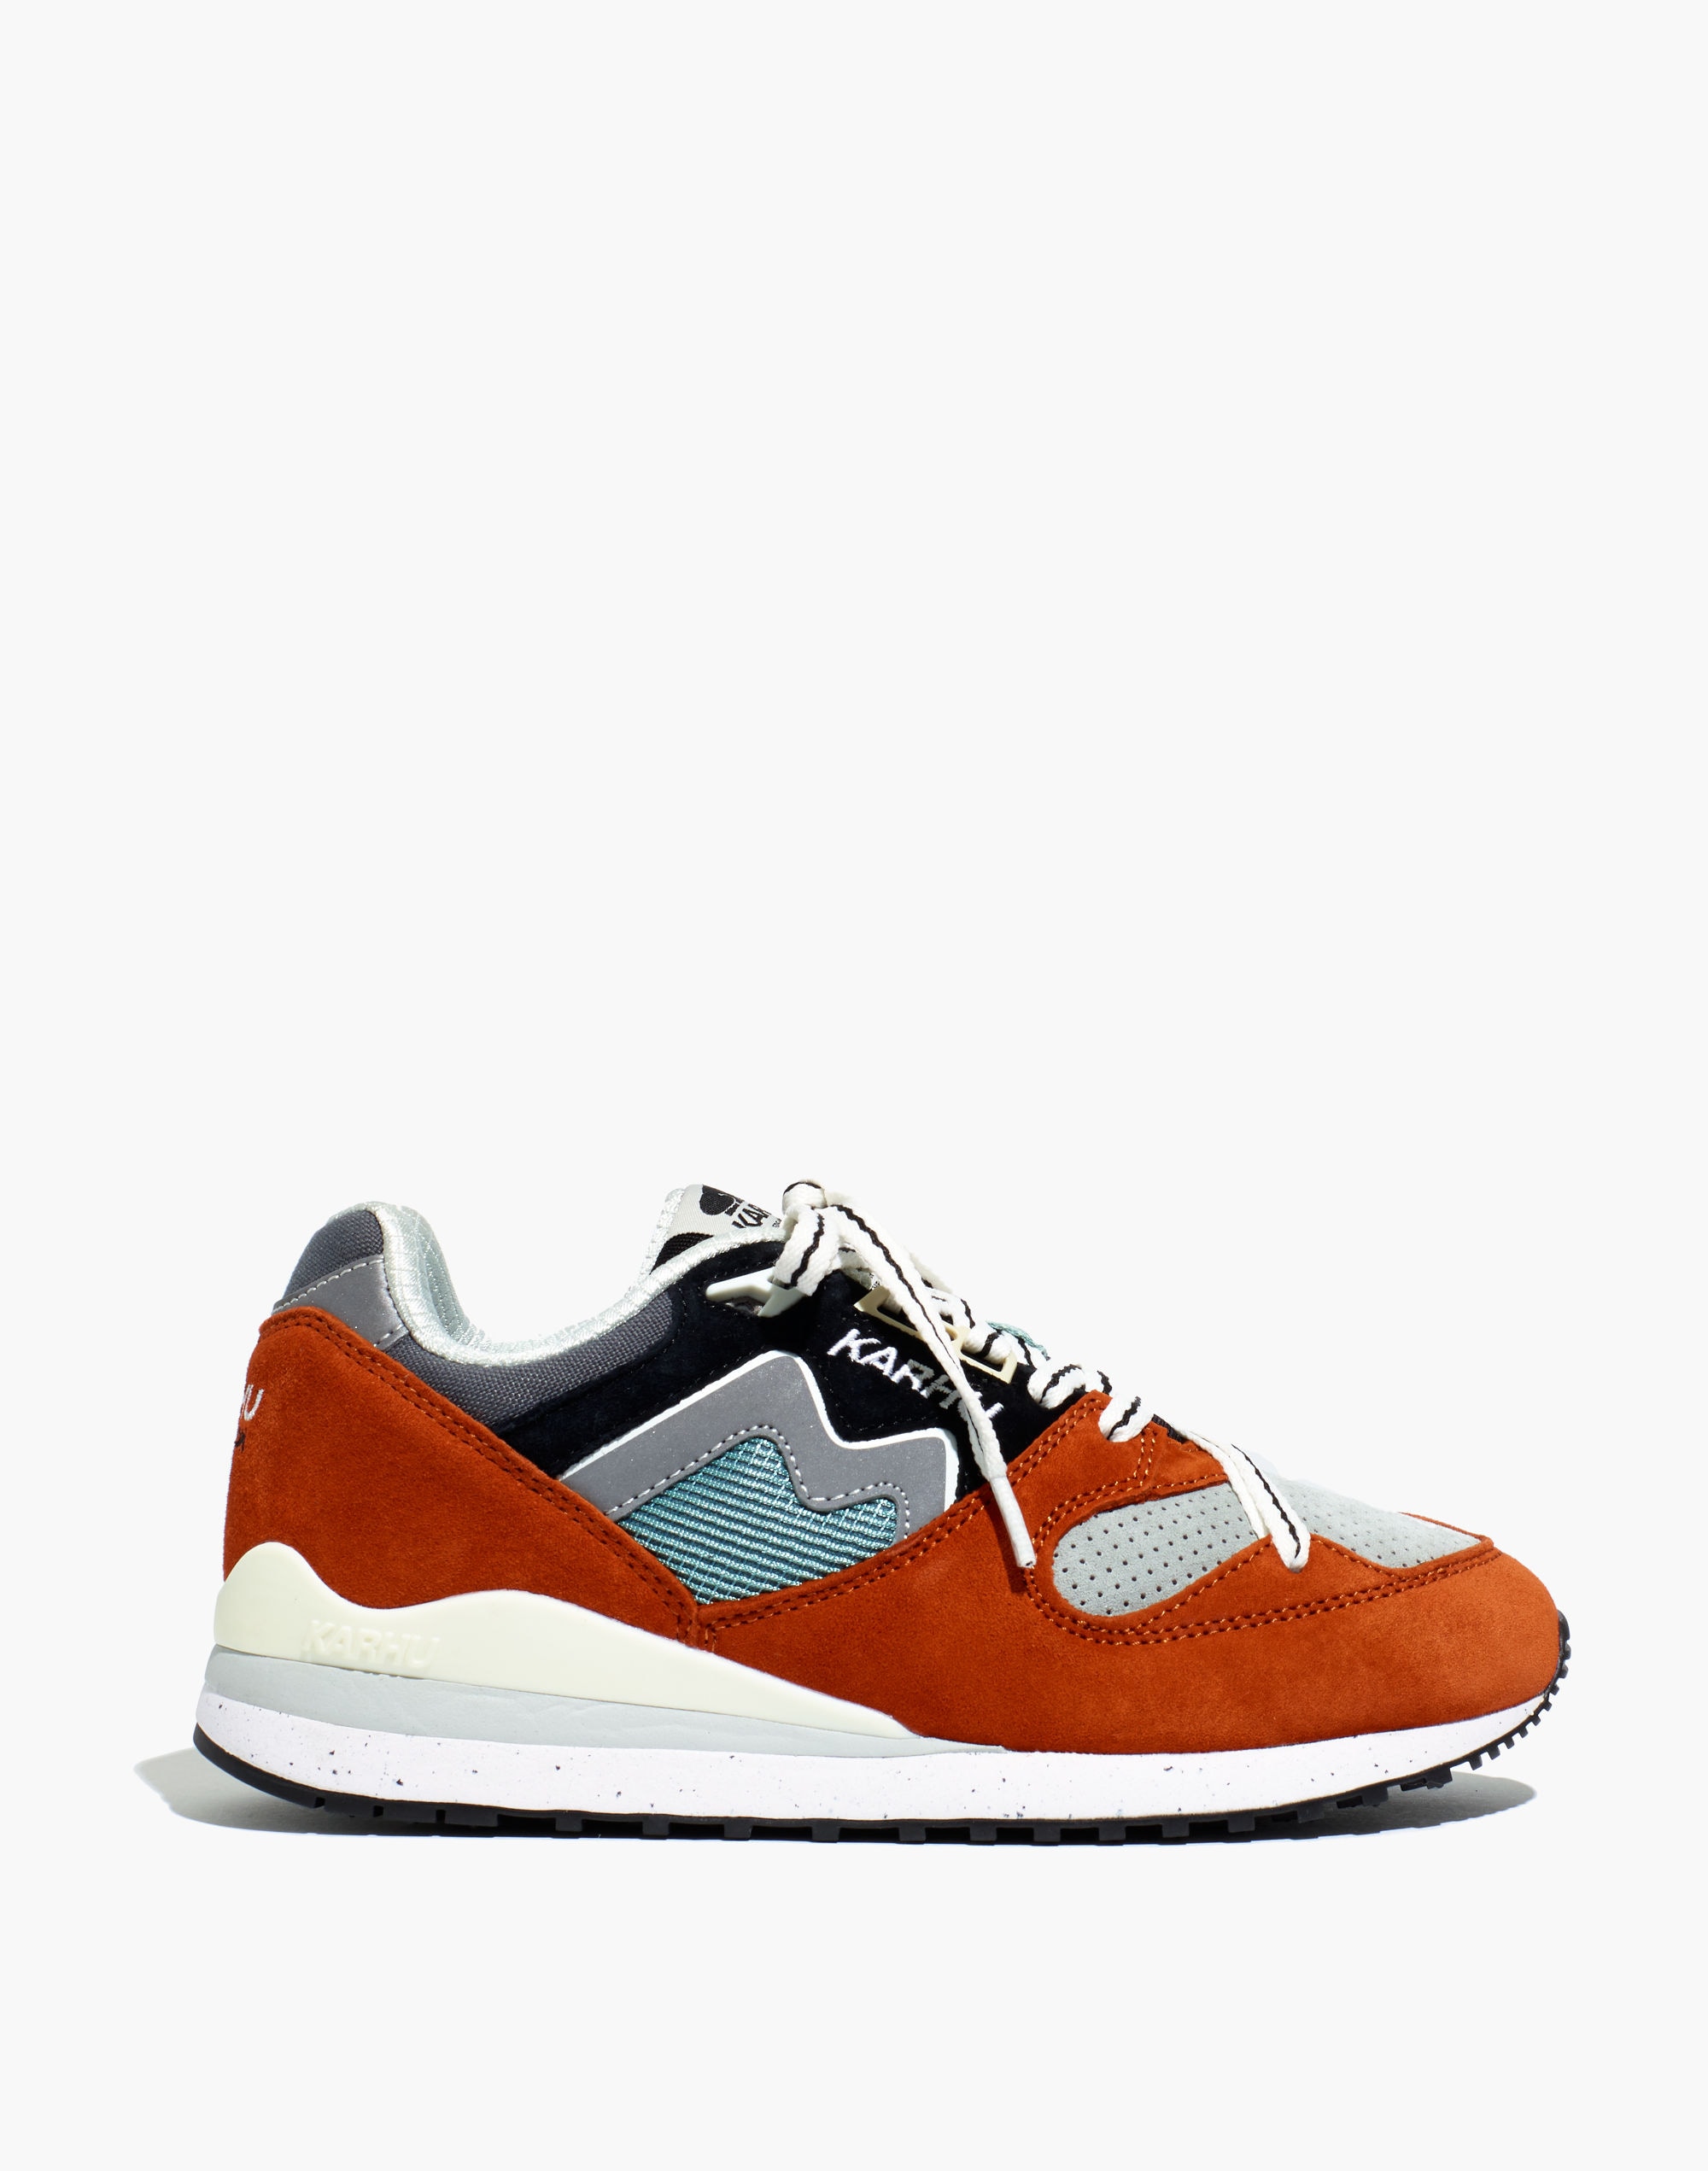 Karhu Unisex Suede Synchron Classic Lace-Up Sneakers